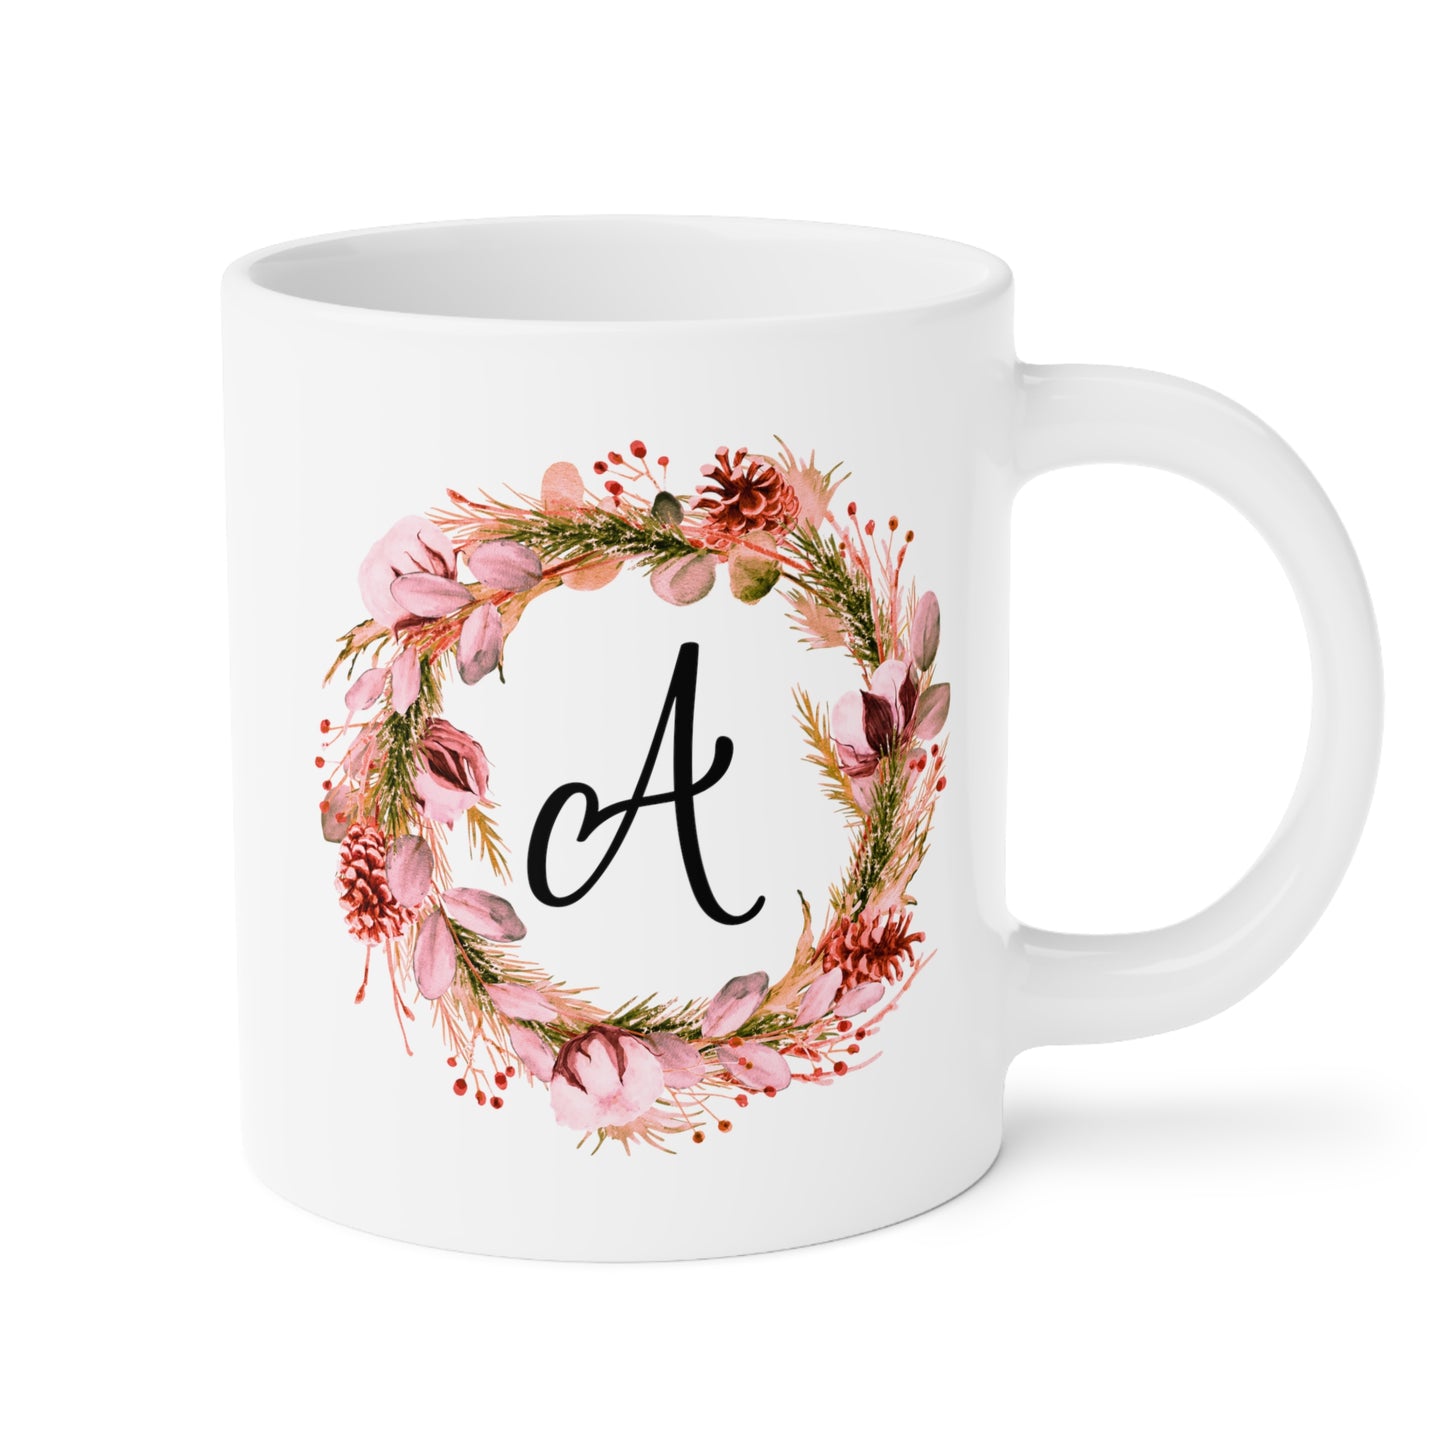 Bridesmaid Initial 20oz white funny large coffee mug gift for bridal shower party maid of honor custom cup personalized name letter waveywares wavey wares wavywares wavy wares